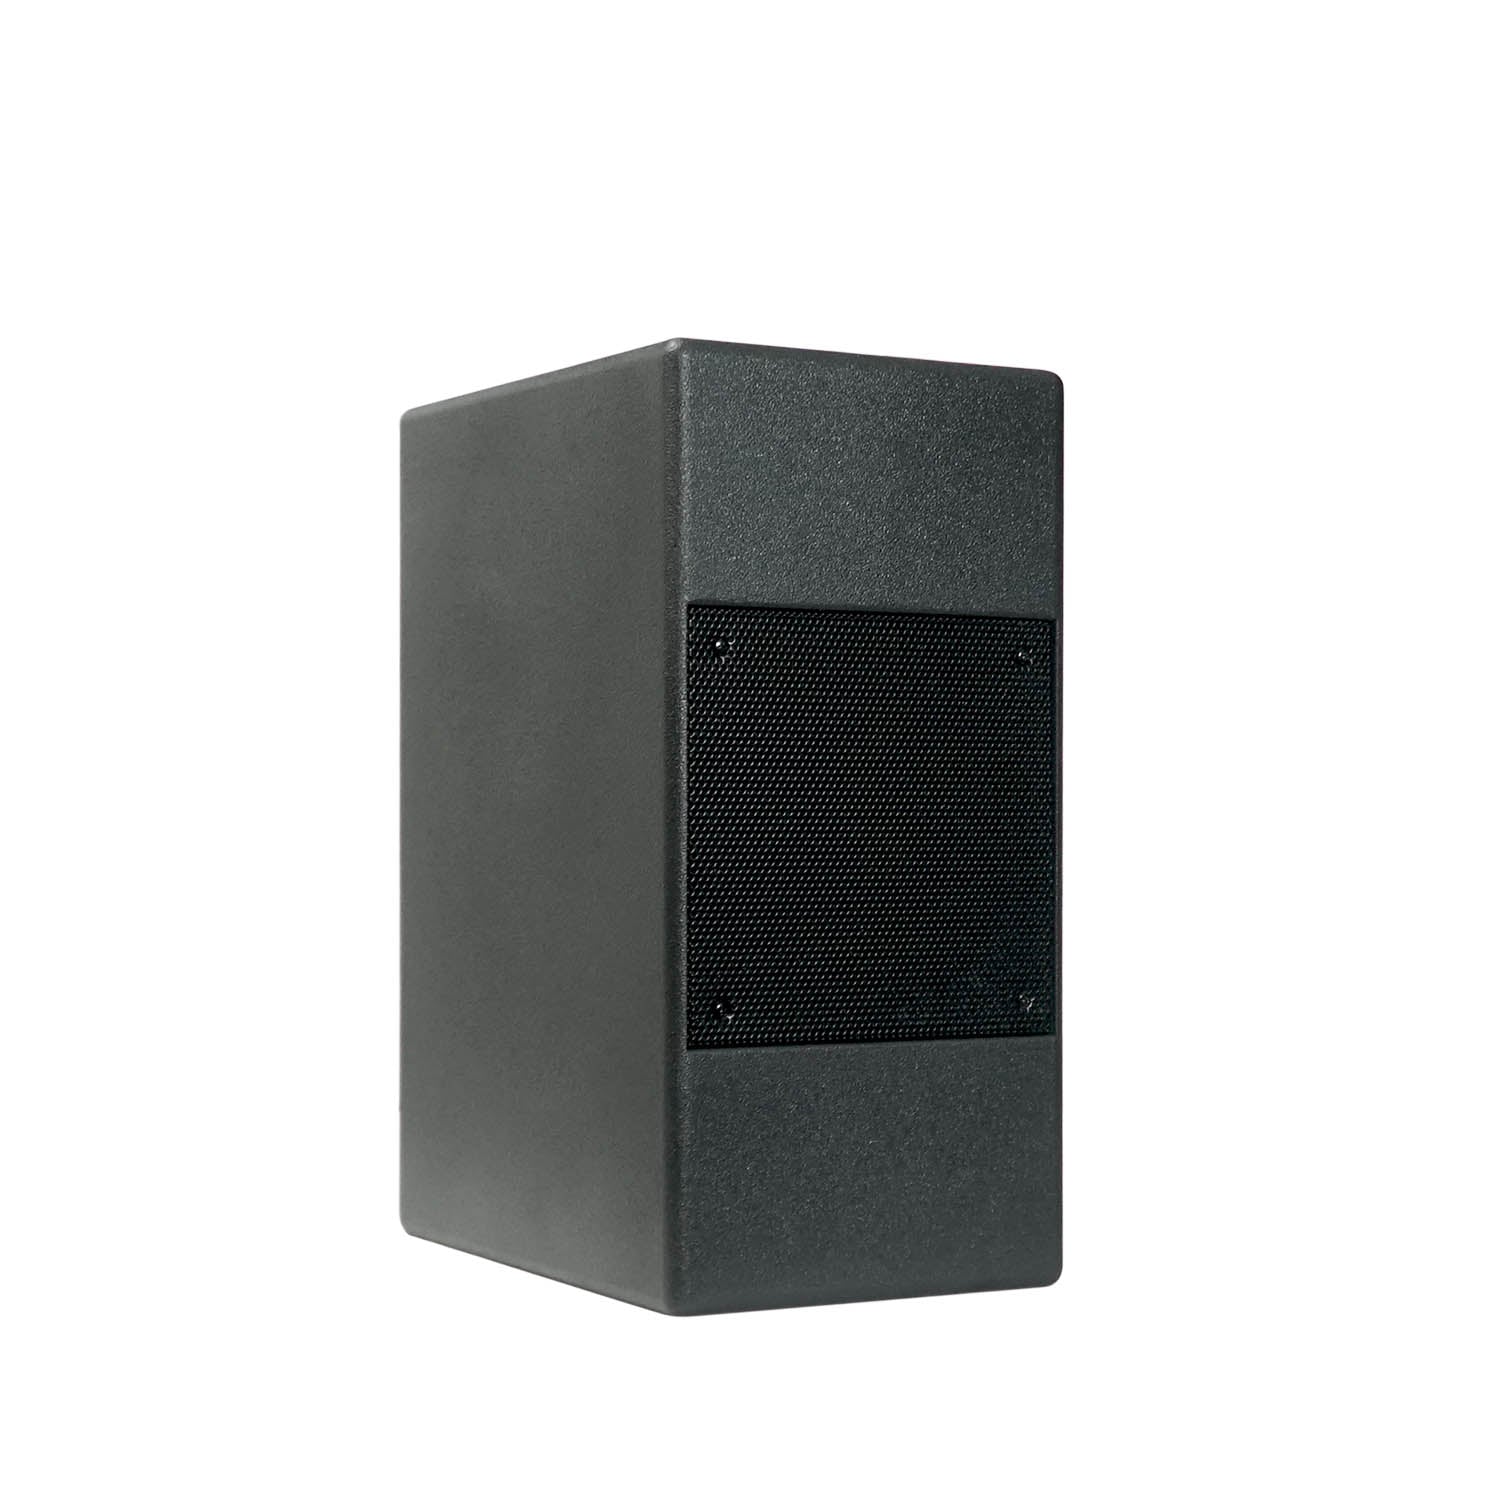 dB Technologies IS 8S, 8" Passive Subwoofer 200W - Black - Hollywood DJ